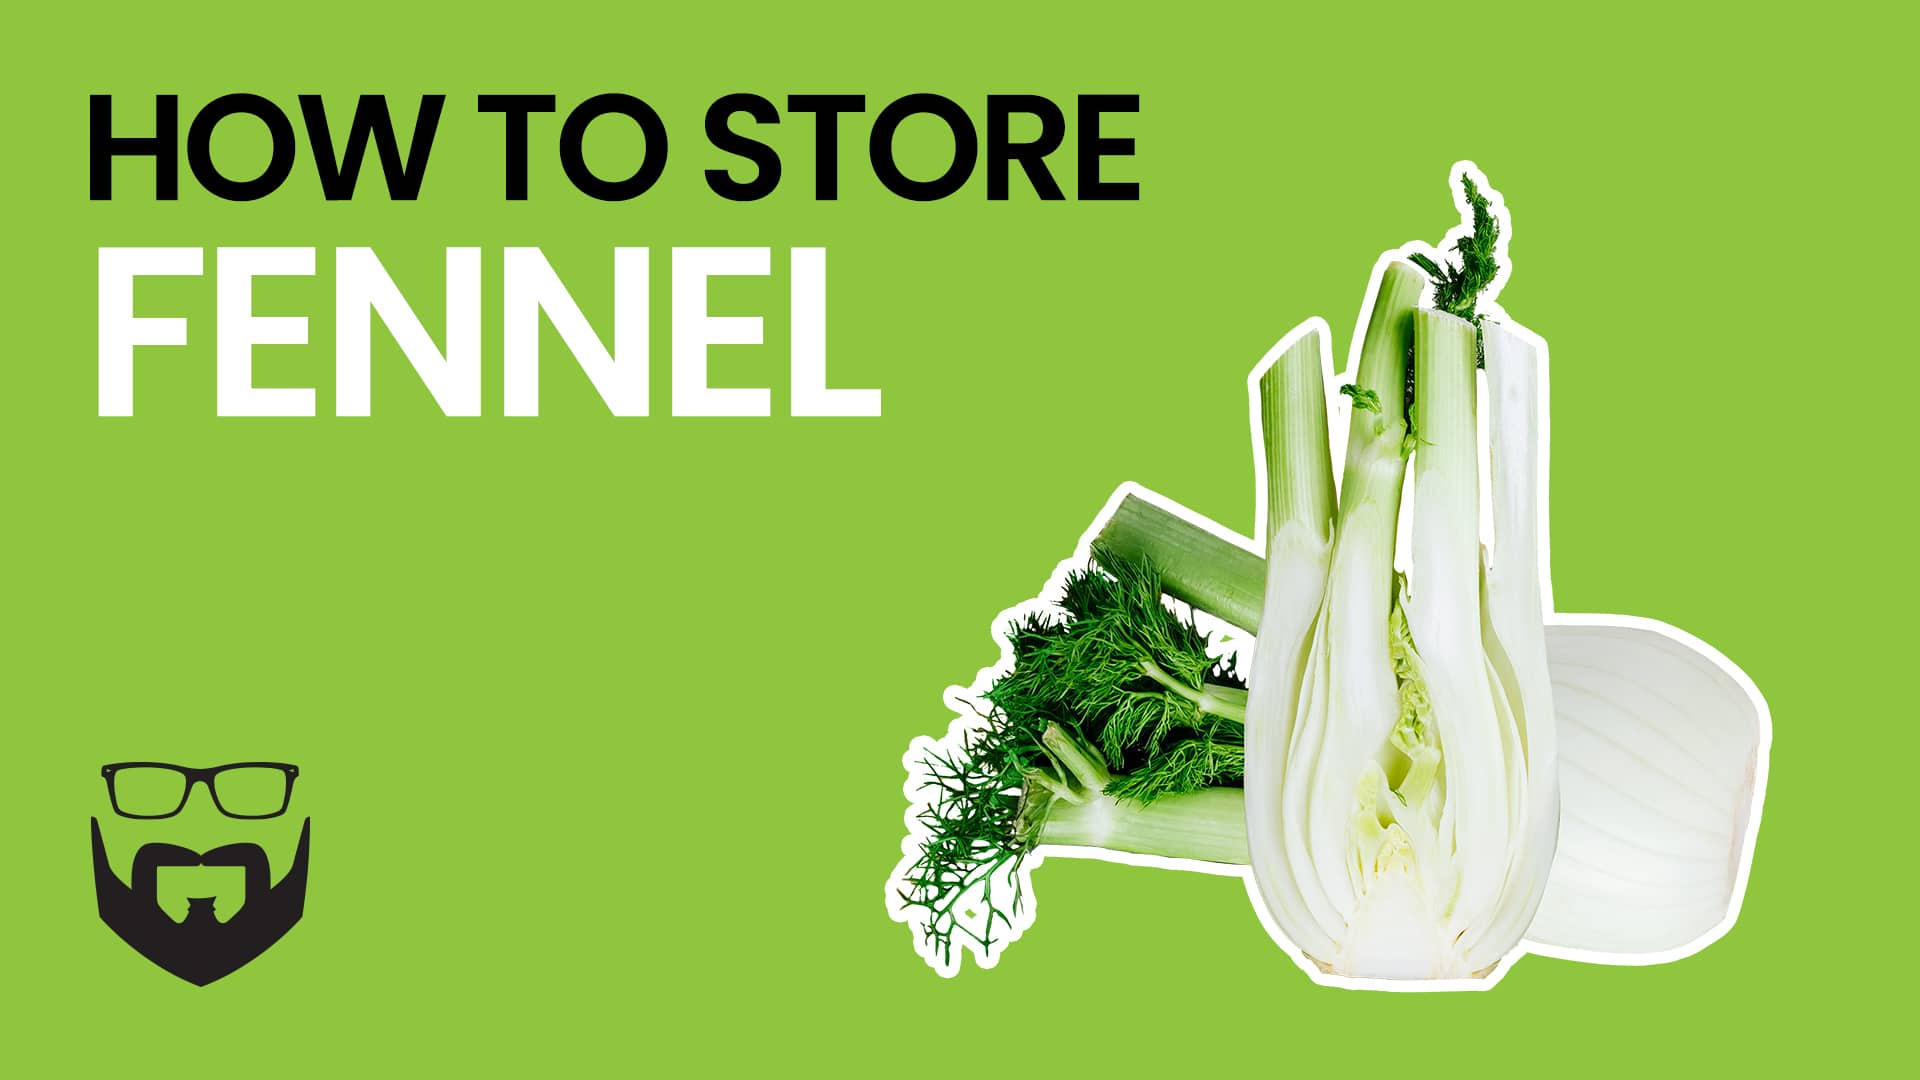 How to Store Fennel Video - Green